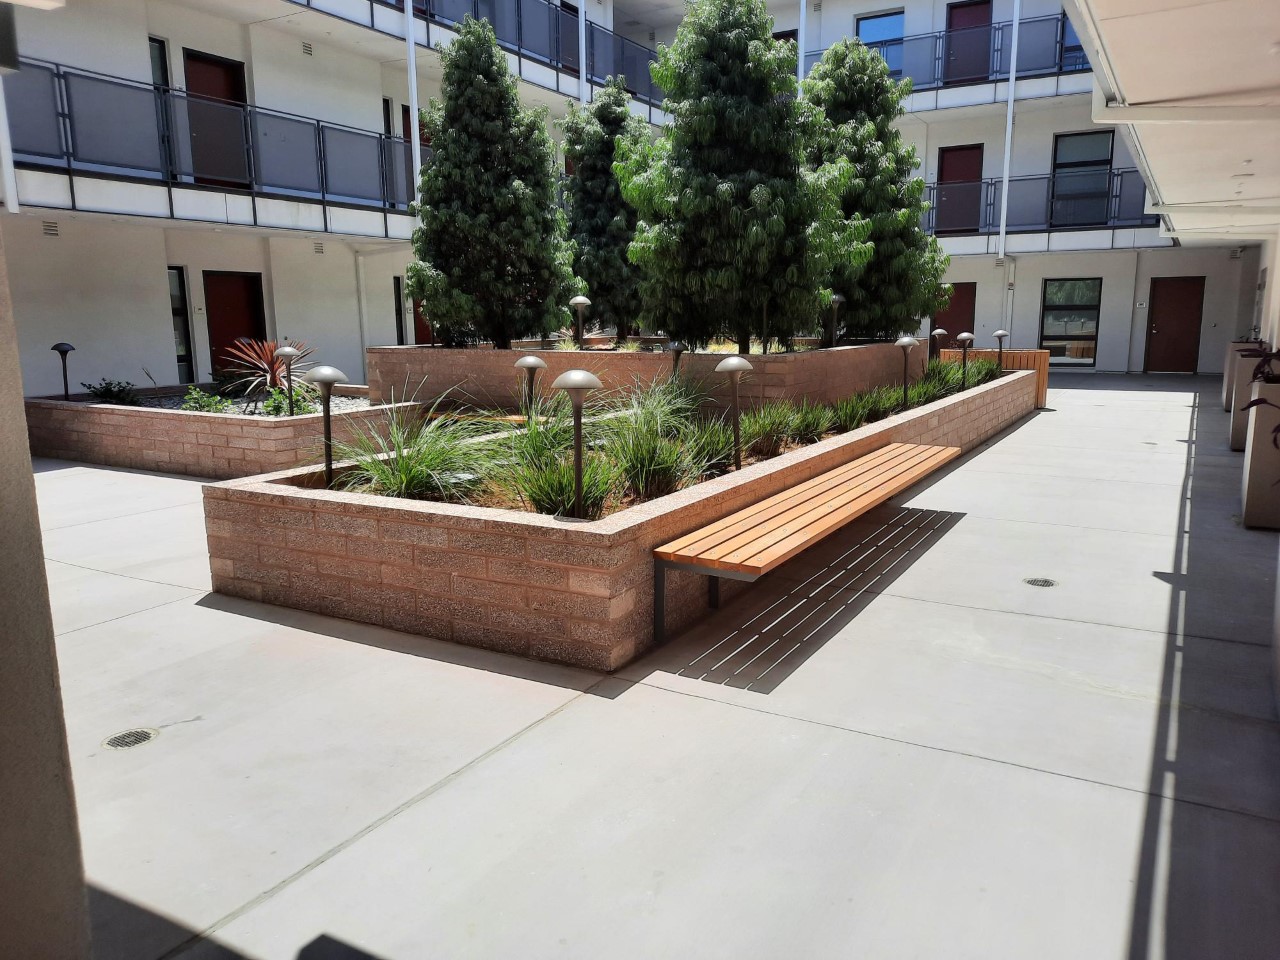 Outdoor patio area located at the center of the building. There are four trees, surrounded by planters, plants, and lamps with benches and trashcans available.